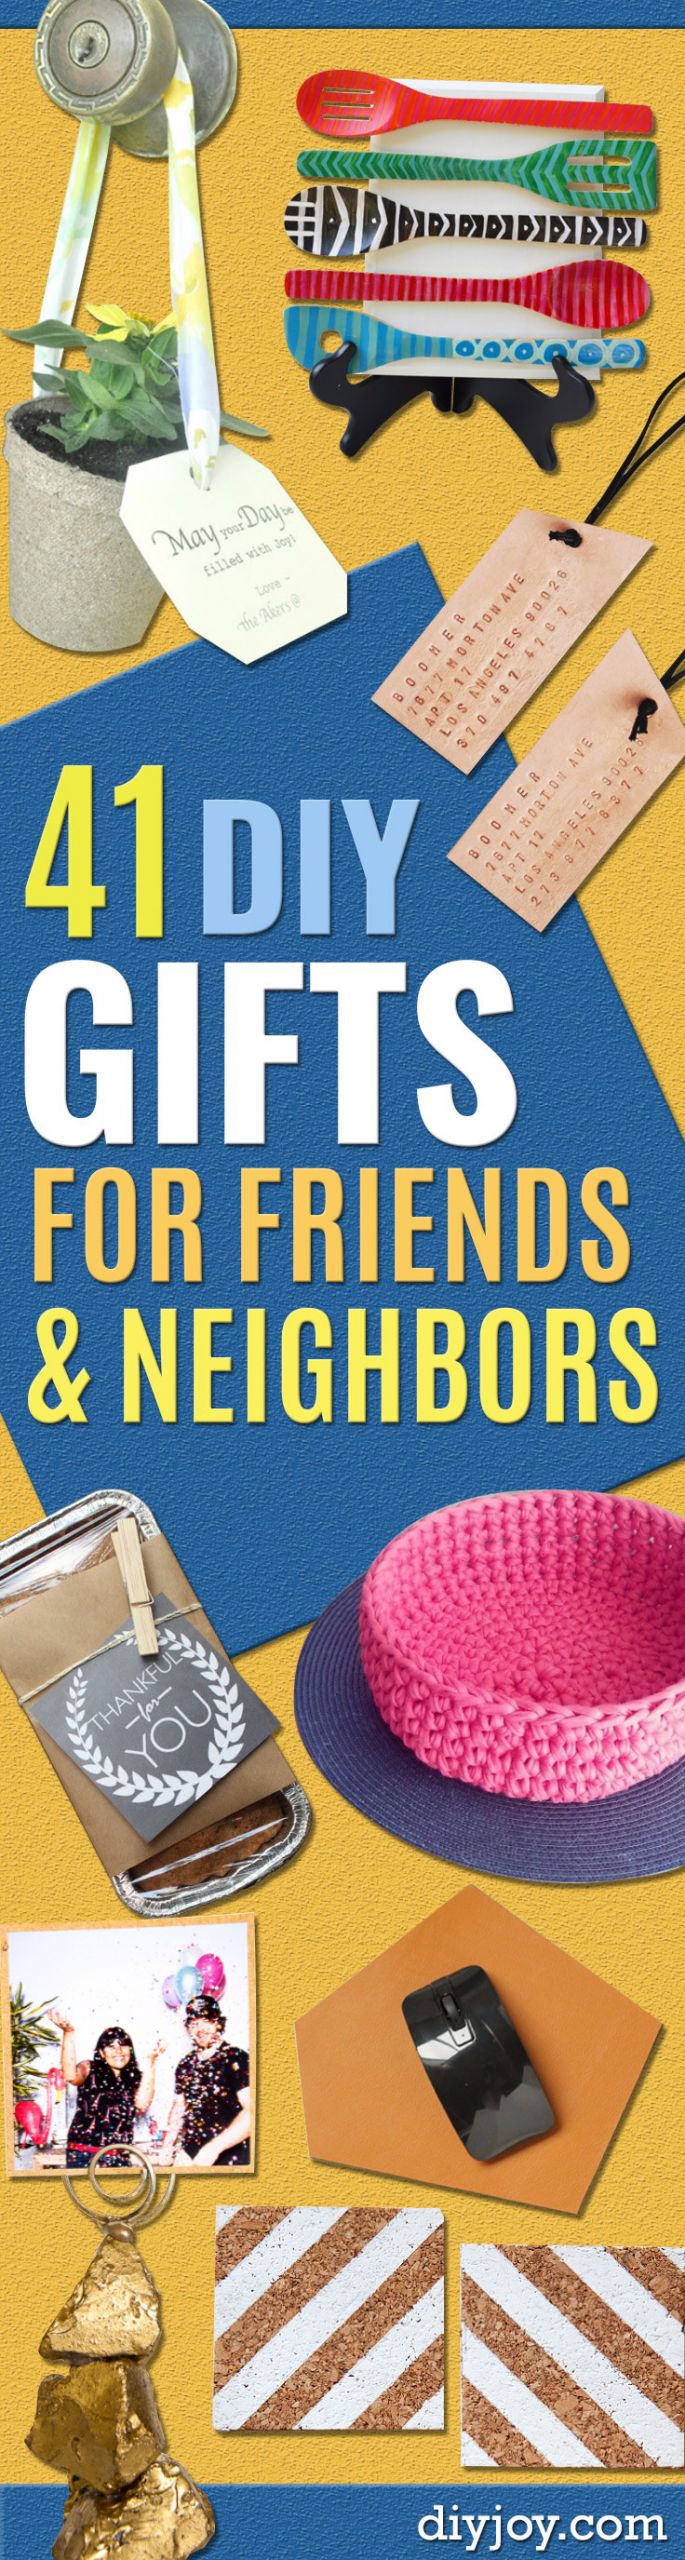 Easy DIY Gifts For Friends
 41 Best Gifts To Make for Friends and Neighbors